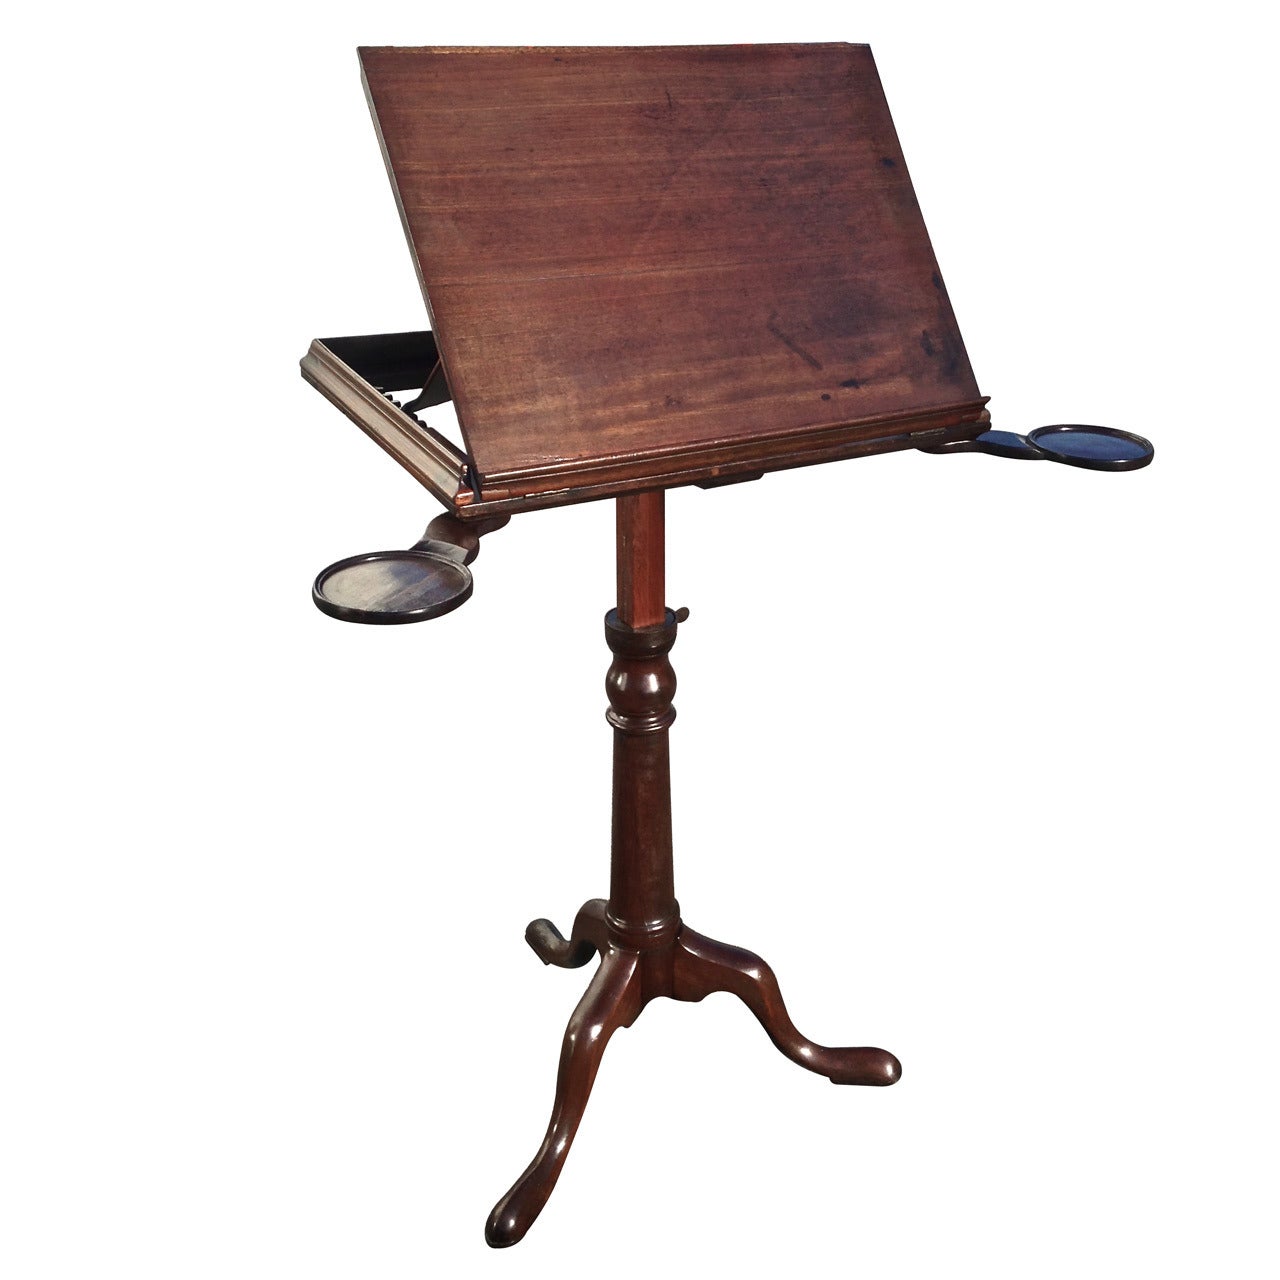 Period and Unique Georgian Adjustable Reading or Music Stand